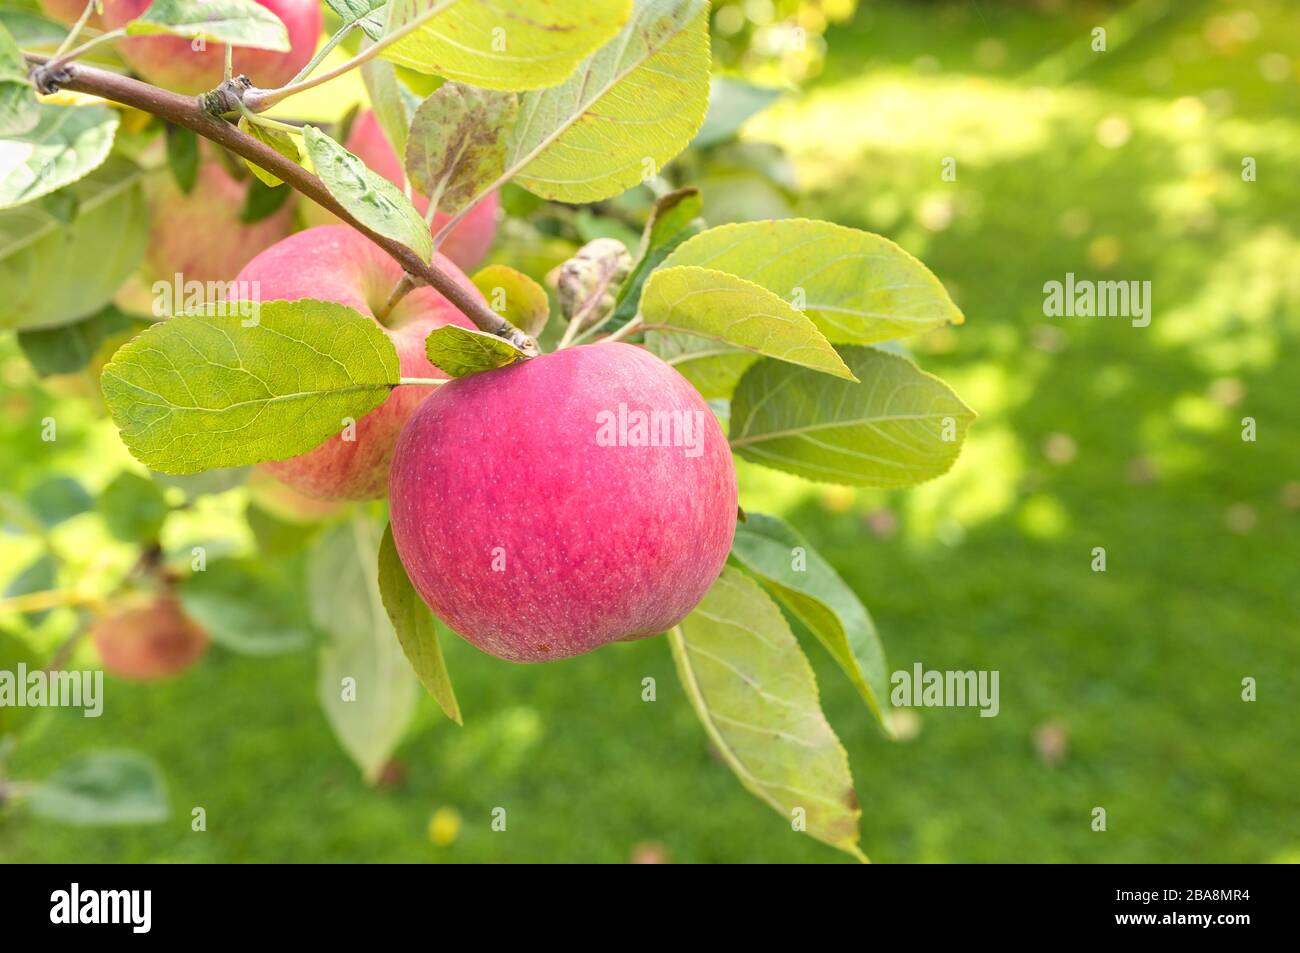 Mature apples on a branch in the garden. Soft focus Stock Photo